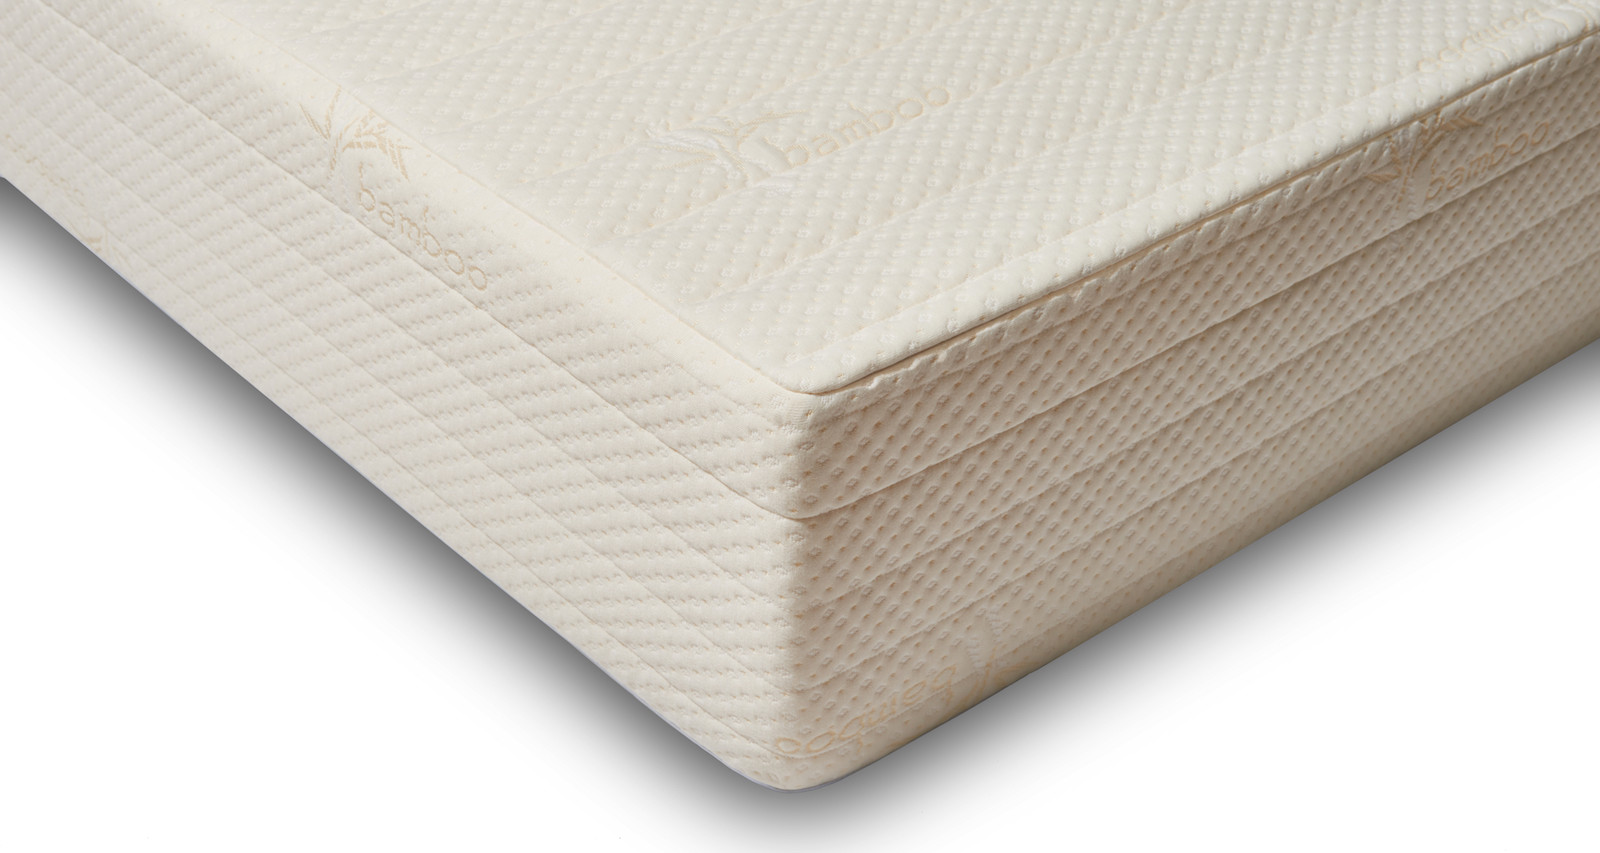 Brentwood Home Mattress Reviews, From Budget to Luxury - How Do They Do It? 2022